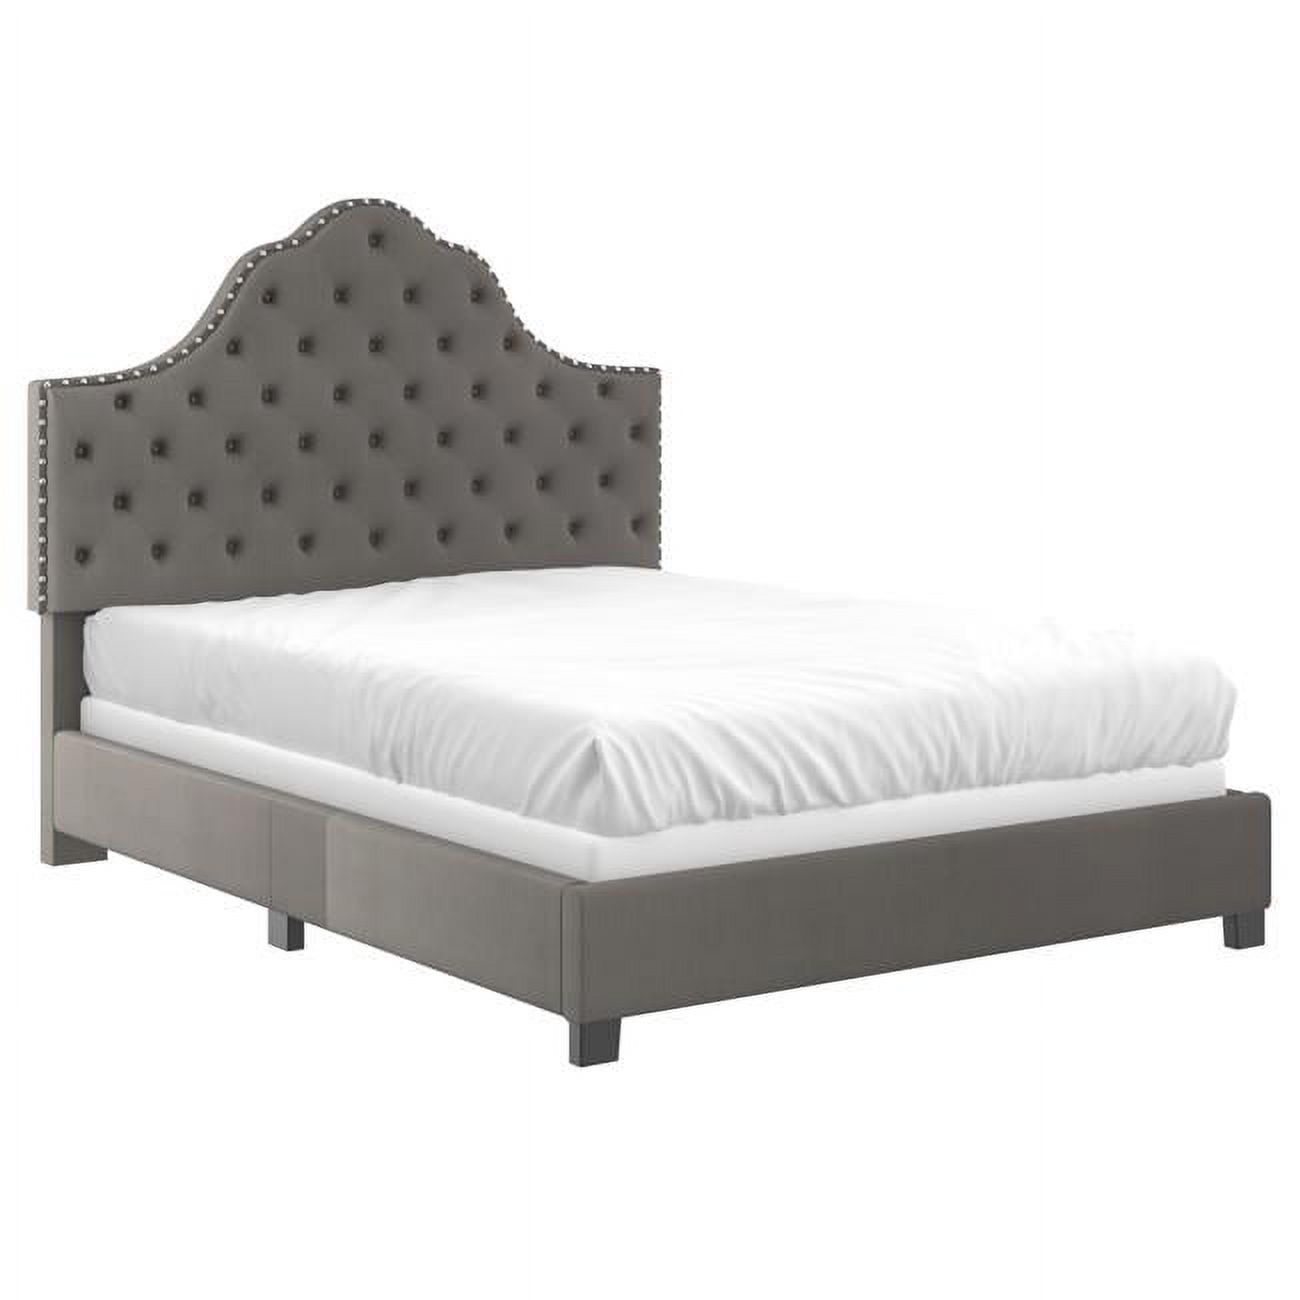 Nspire 101-292Q-GY 60 in. Greta Bed in Grey - Queen Size - image 1 of 6